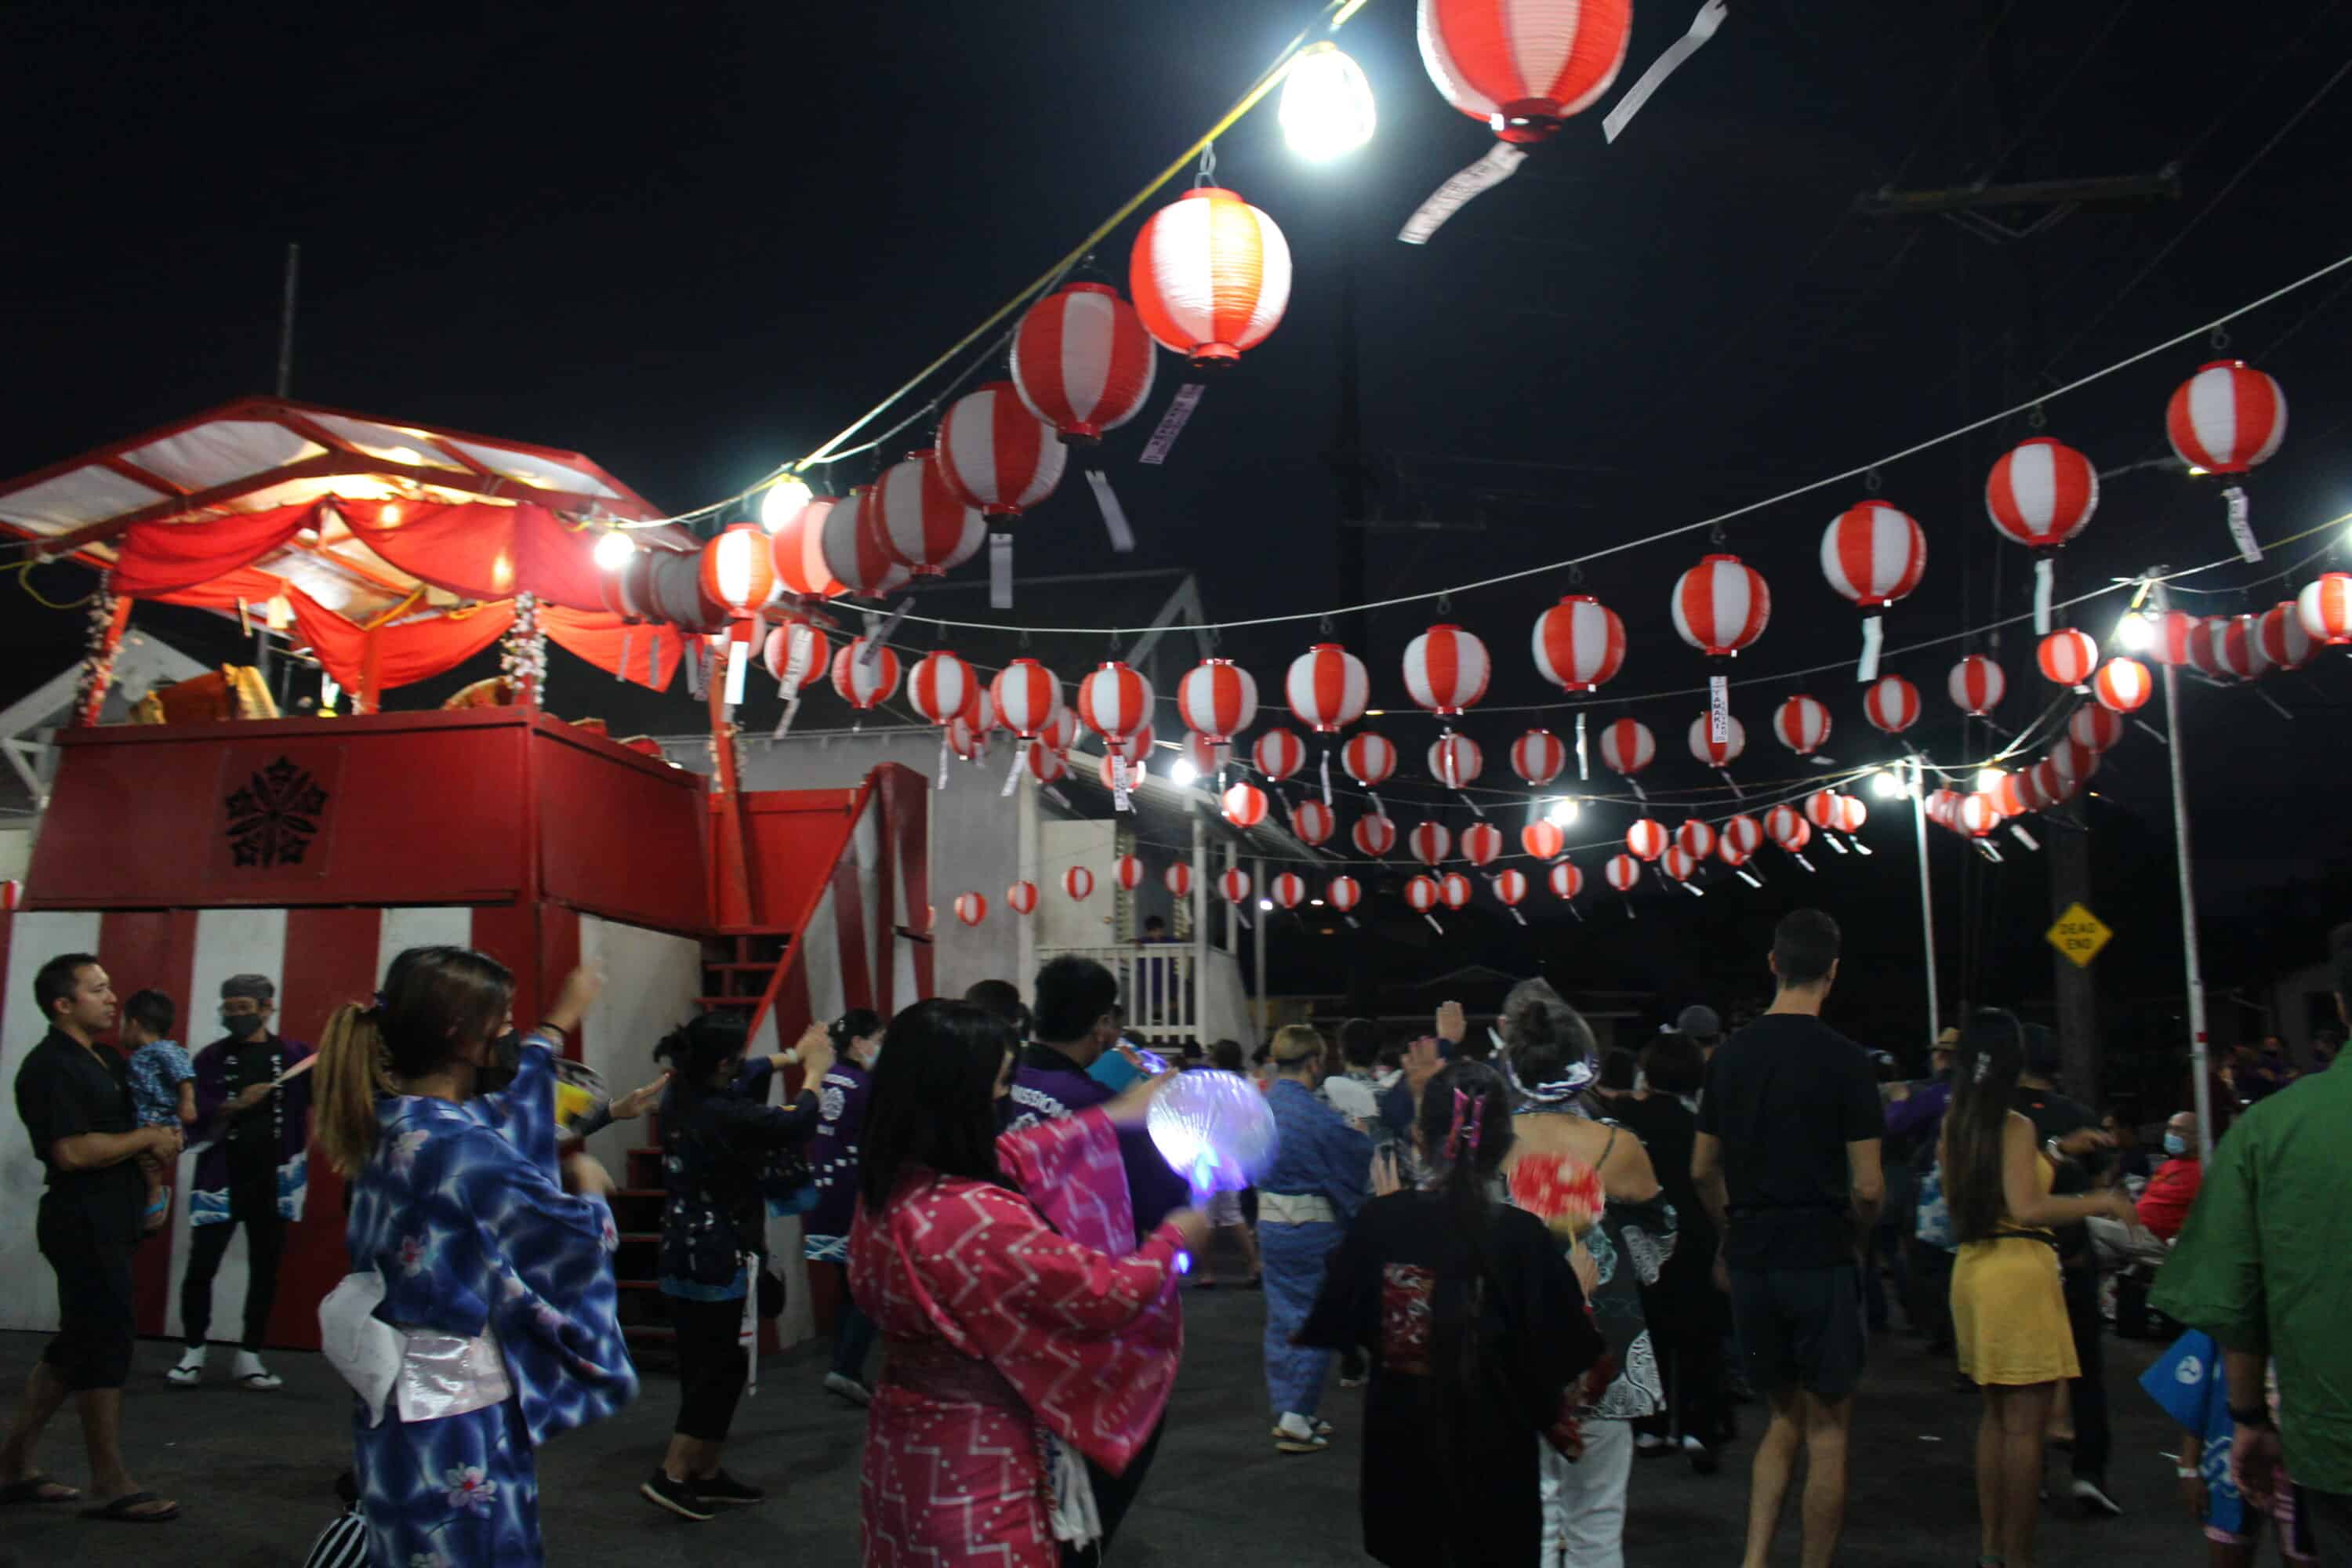 Hawaii’s obon celebrations focus on family as pandemic wanes